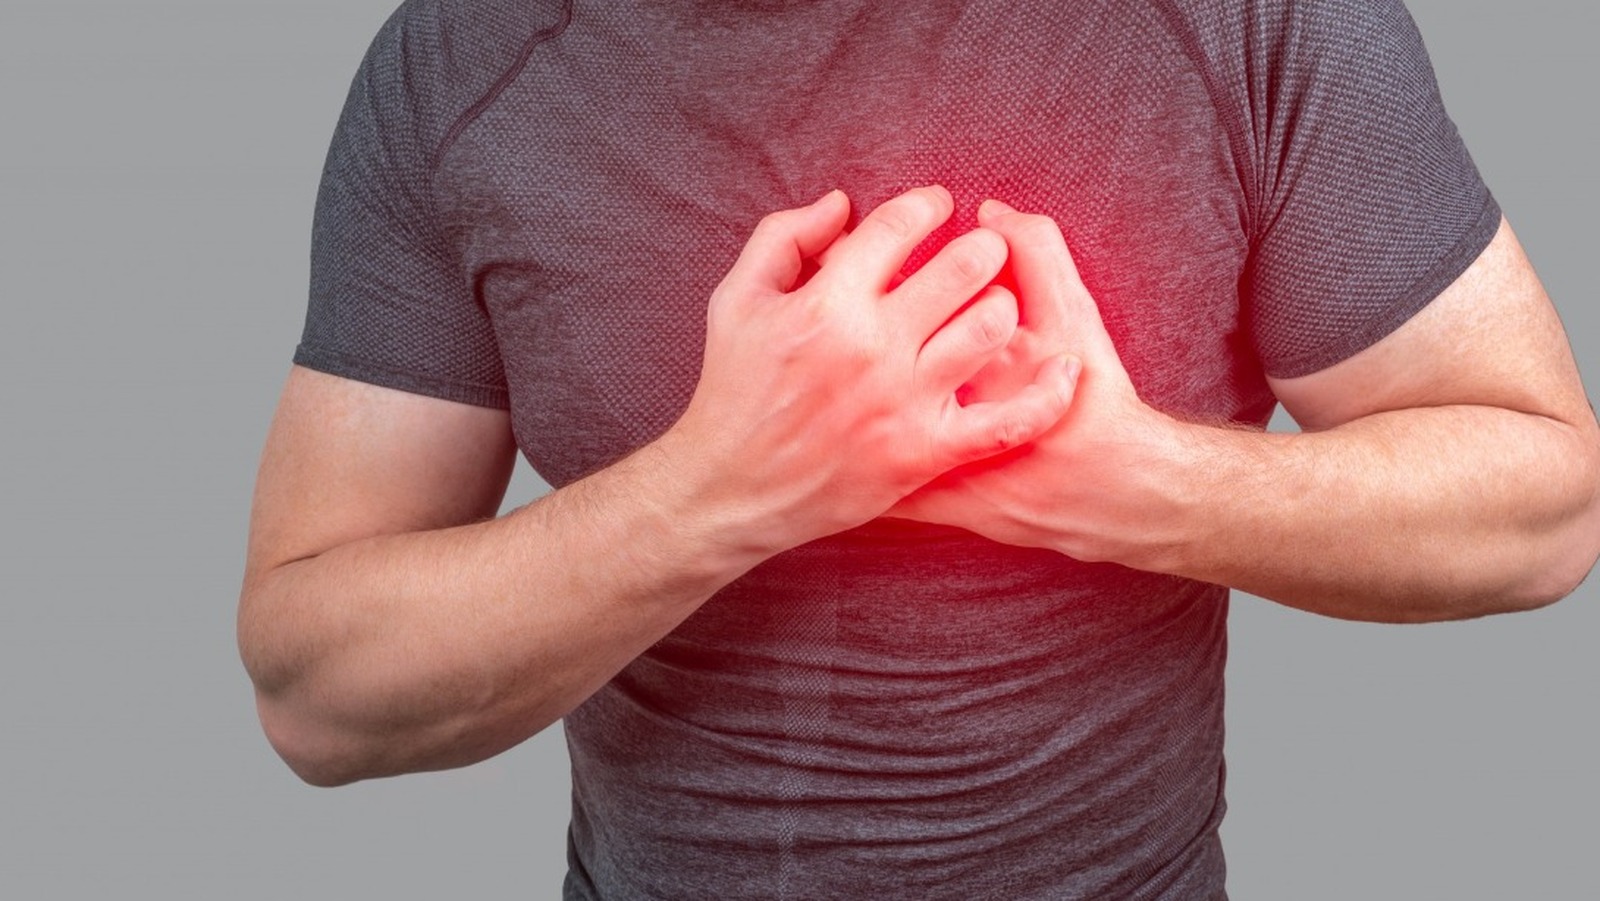 https://www.healthdigest.com/img/gallery/if-you-have-sudden-sharp-pain-in-your-chest-that-disappears-quickly-it-could-be-this/l-intro-1660015907.jpg